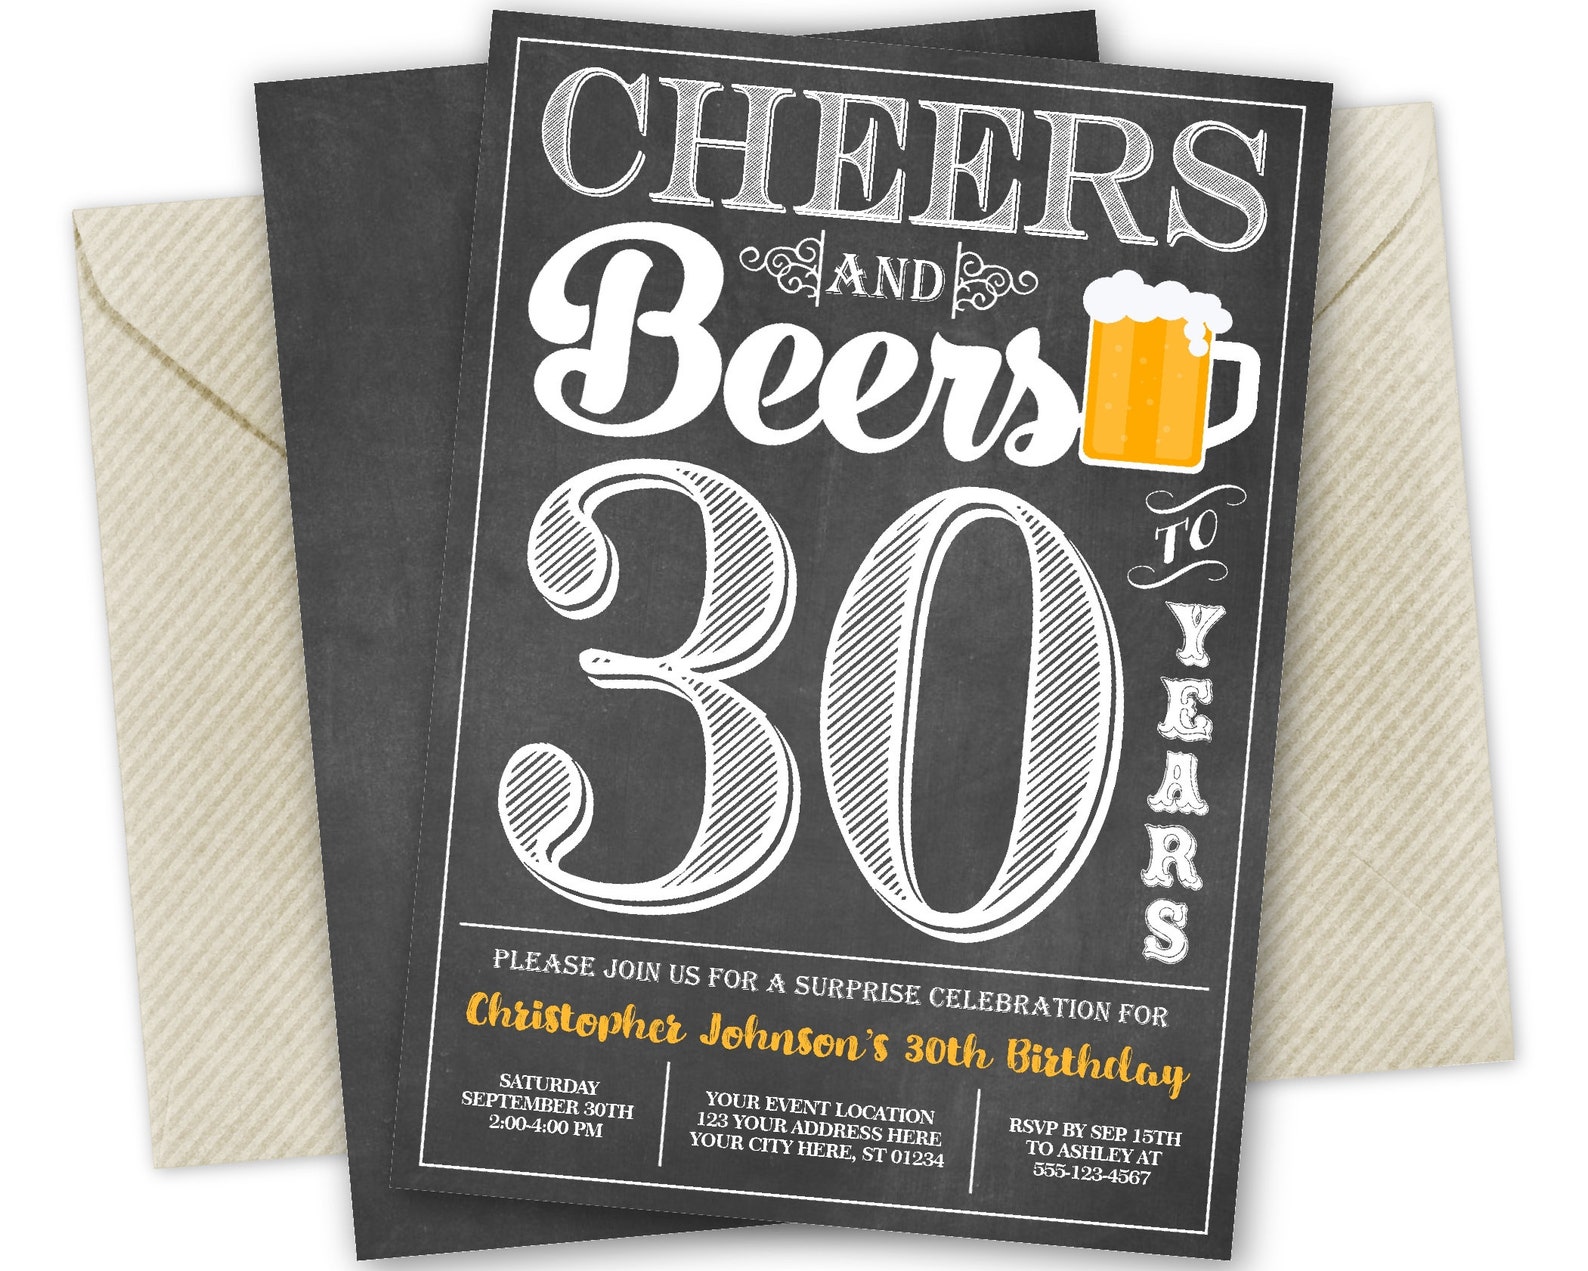 Cheers And Beers To 30 Years Invitation Template Free